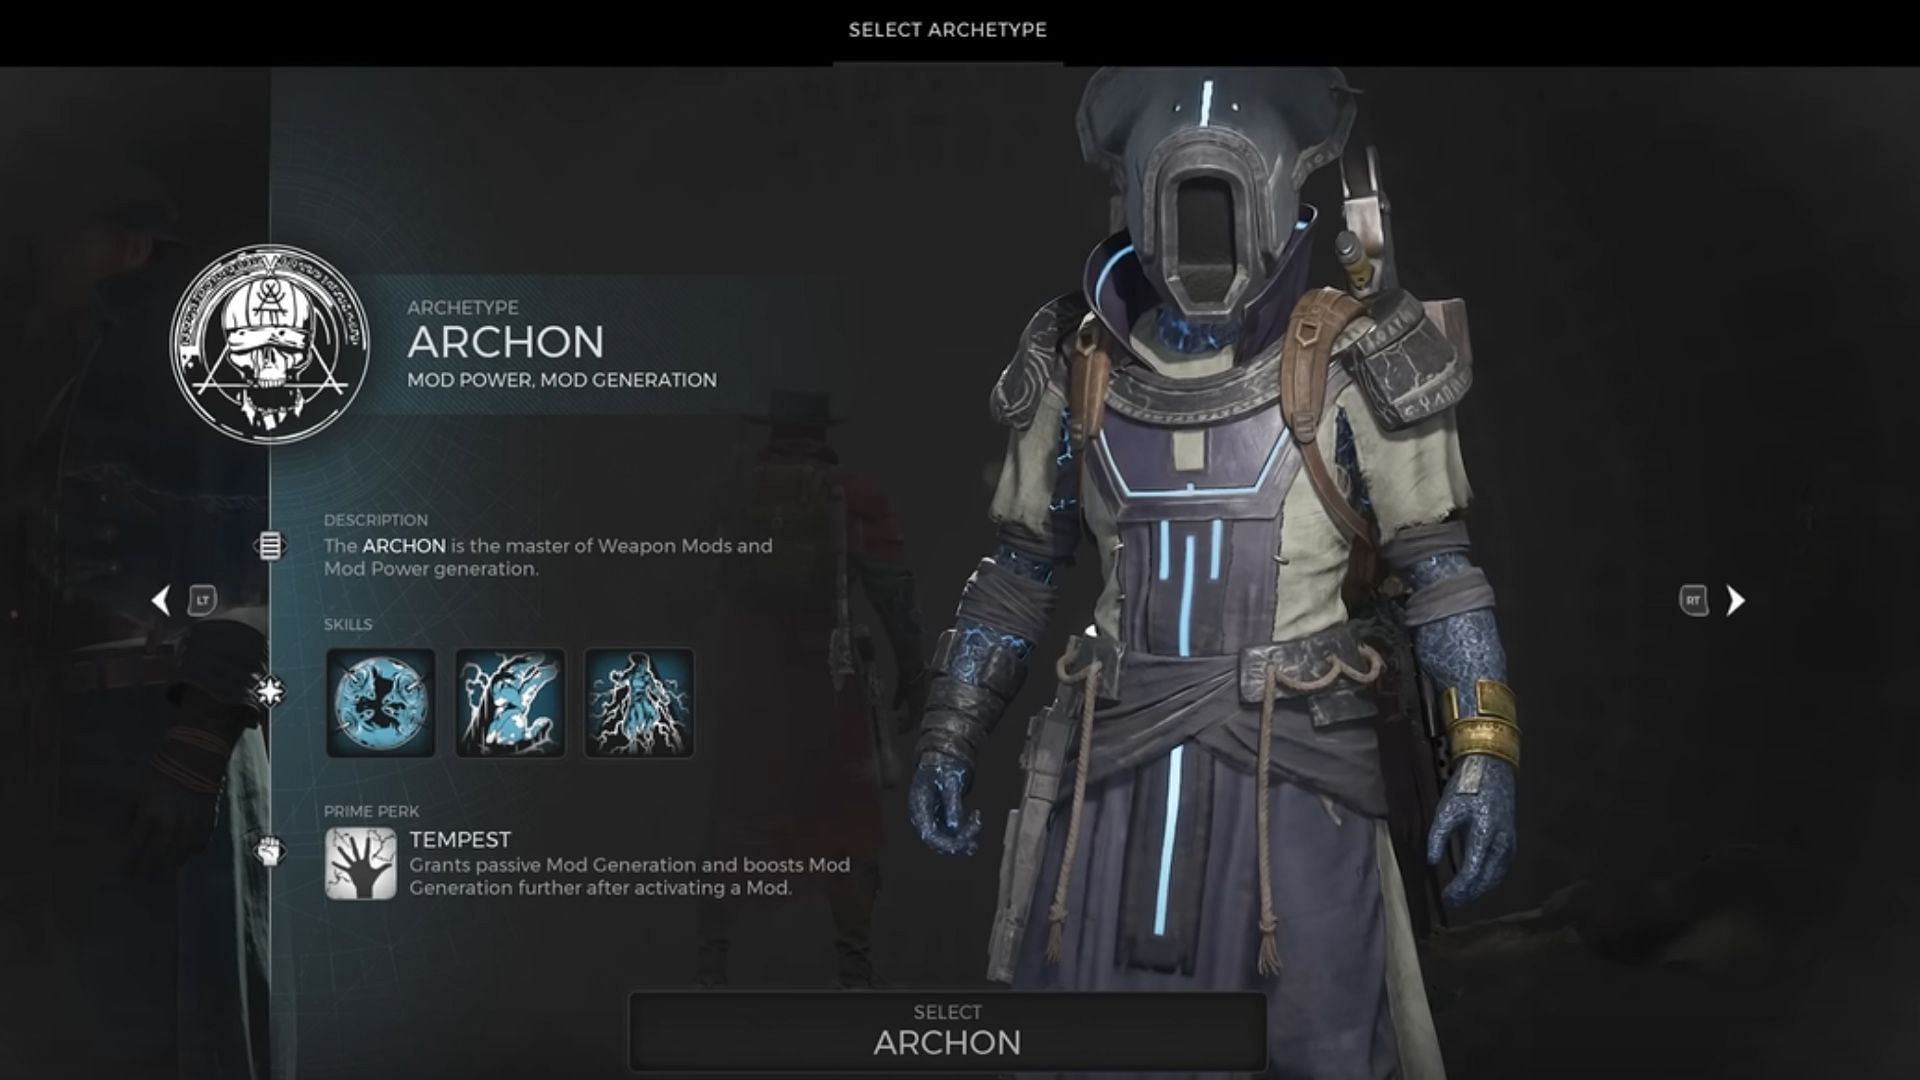 Archon Archetype in Remnant 2 (Image via Gearbox Software)